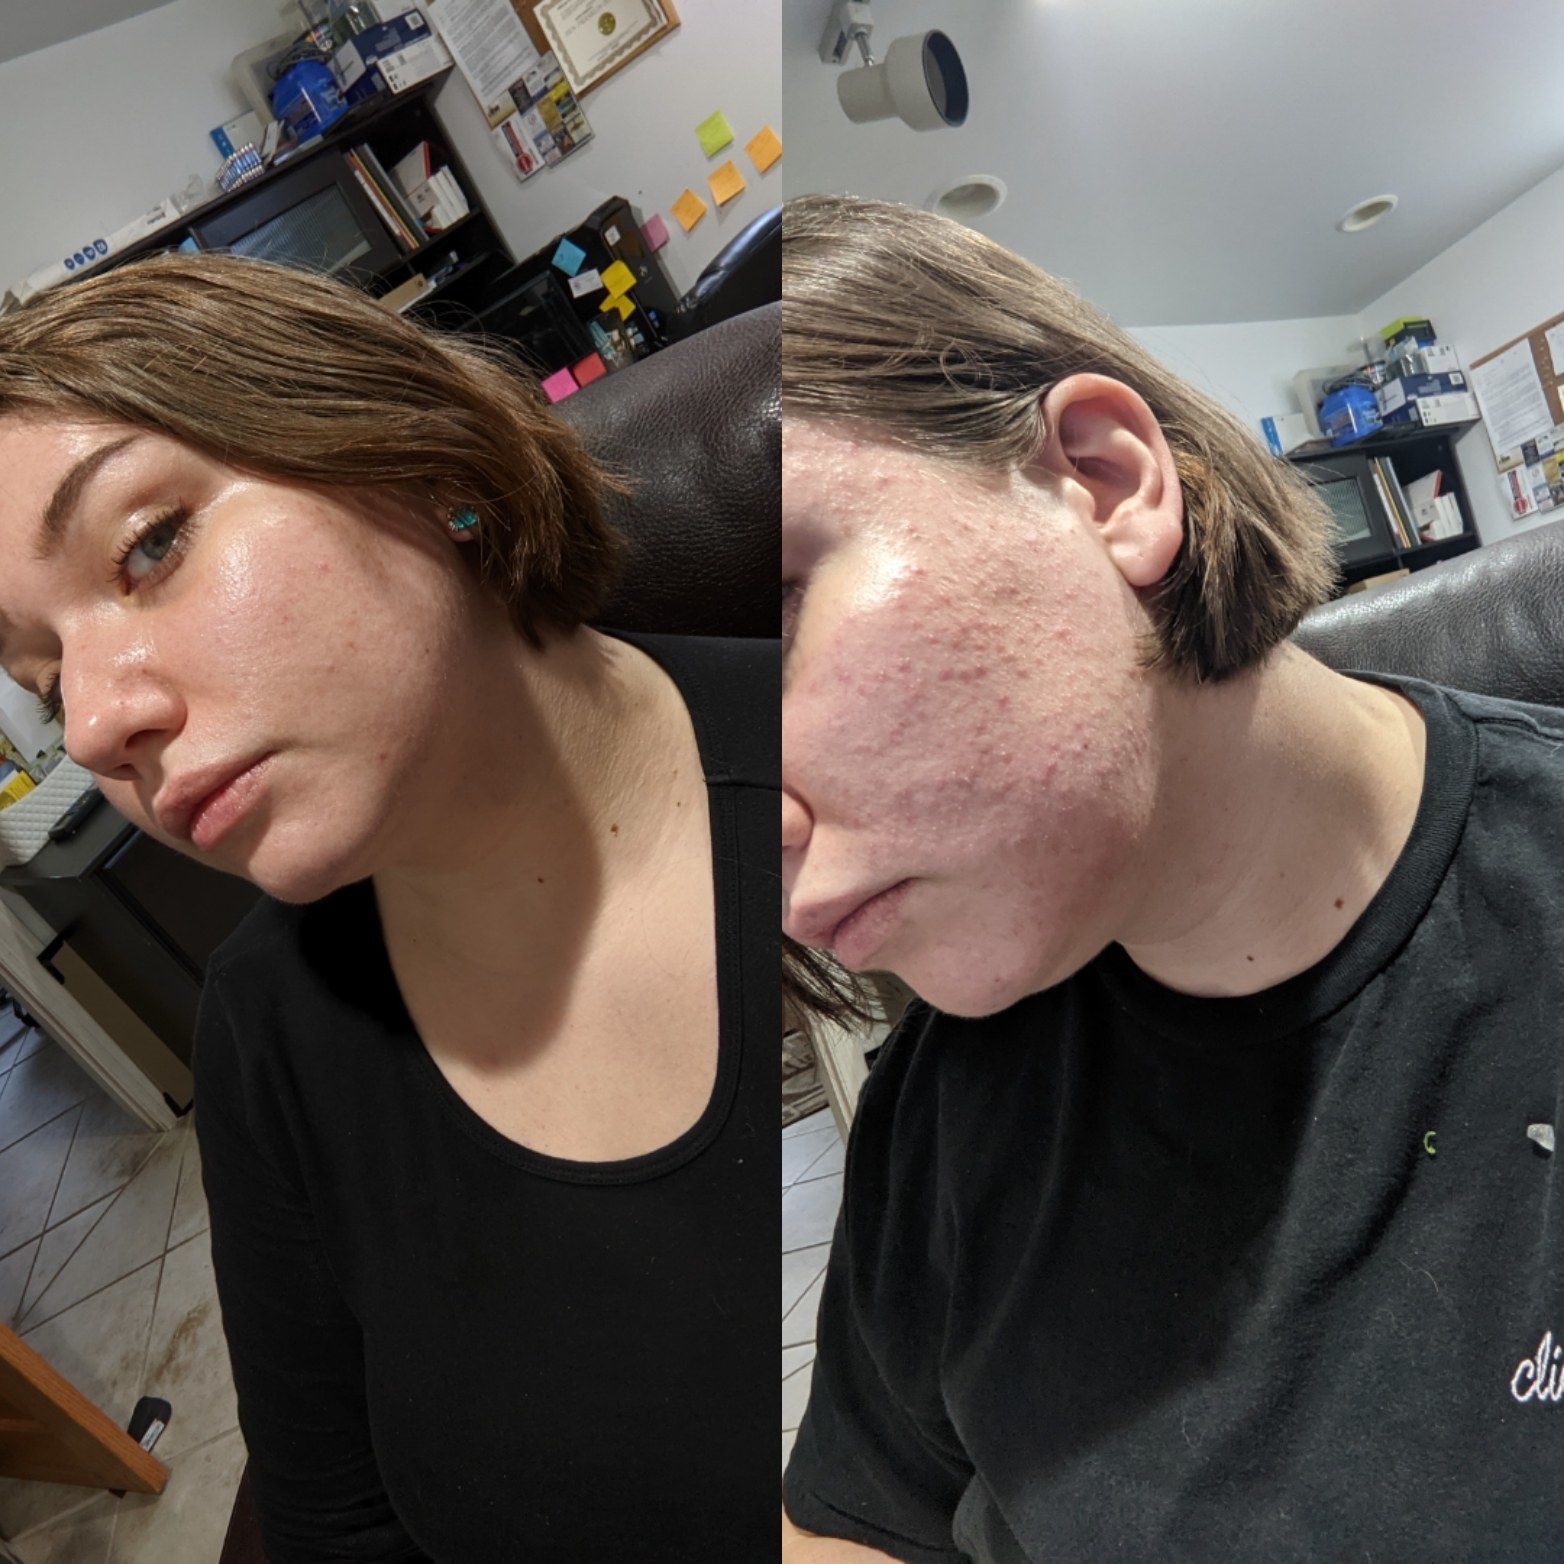 A reviewer showing reduced skin texture and acne